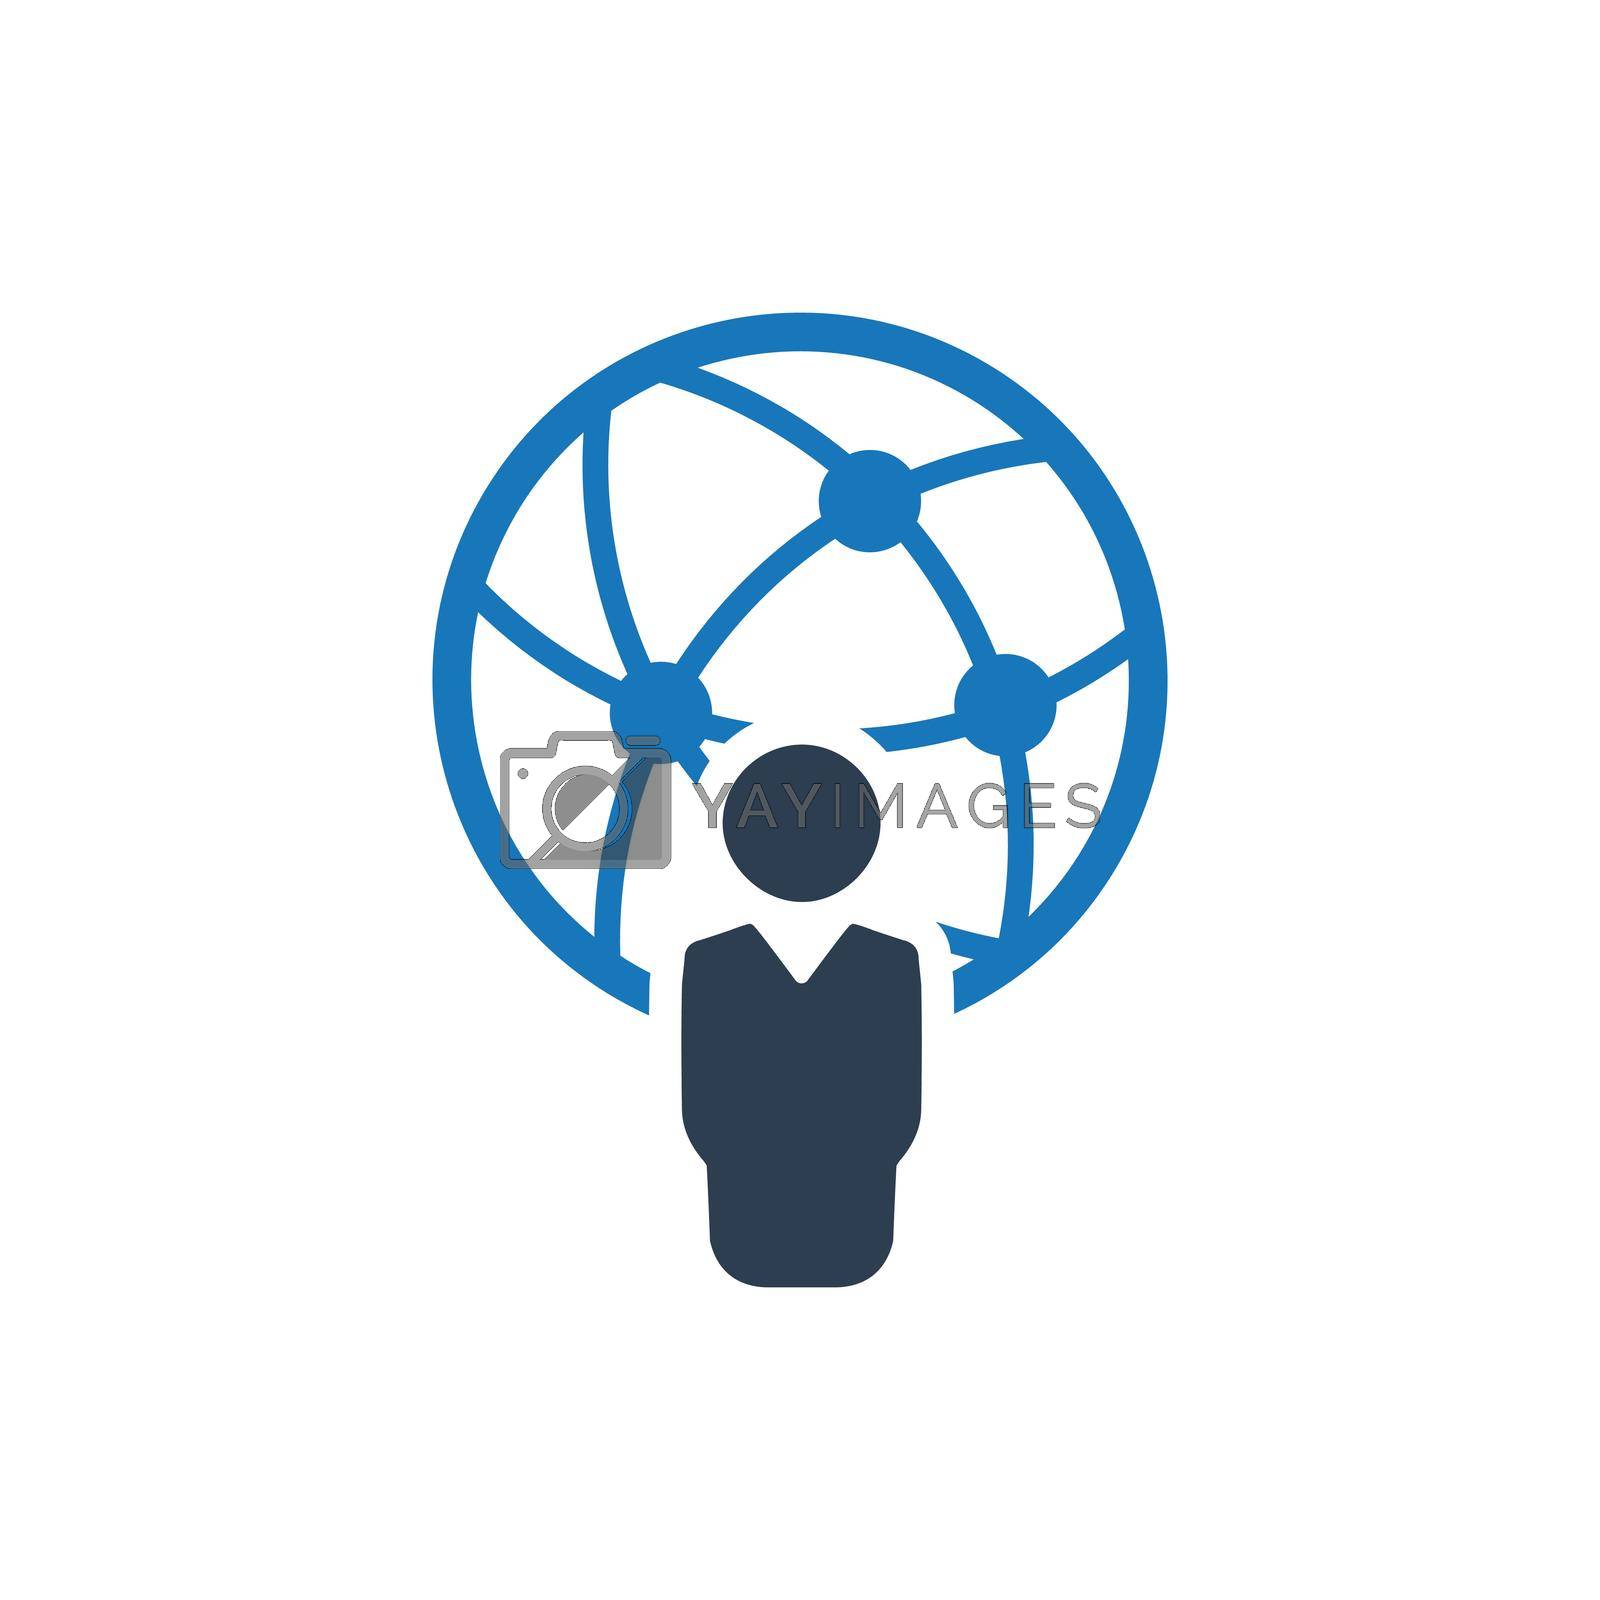 Global Business Communication icon. Meticulously designed vector EPS file.